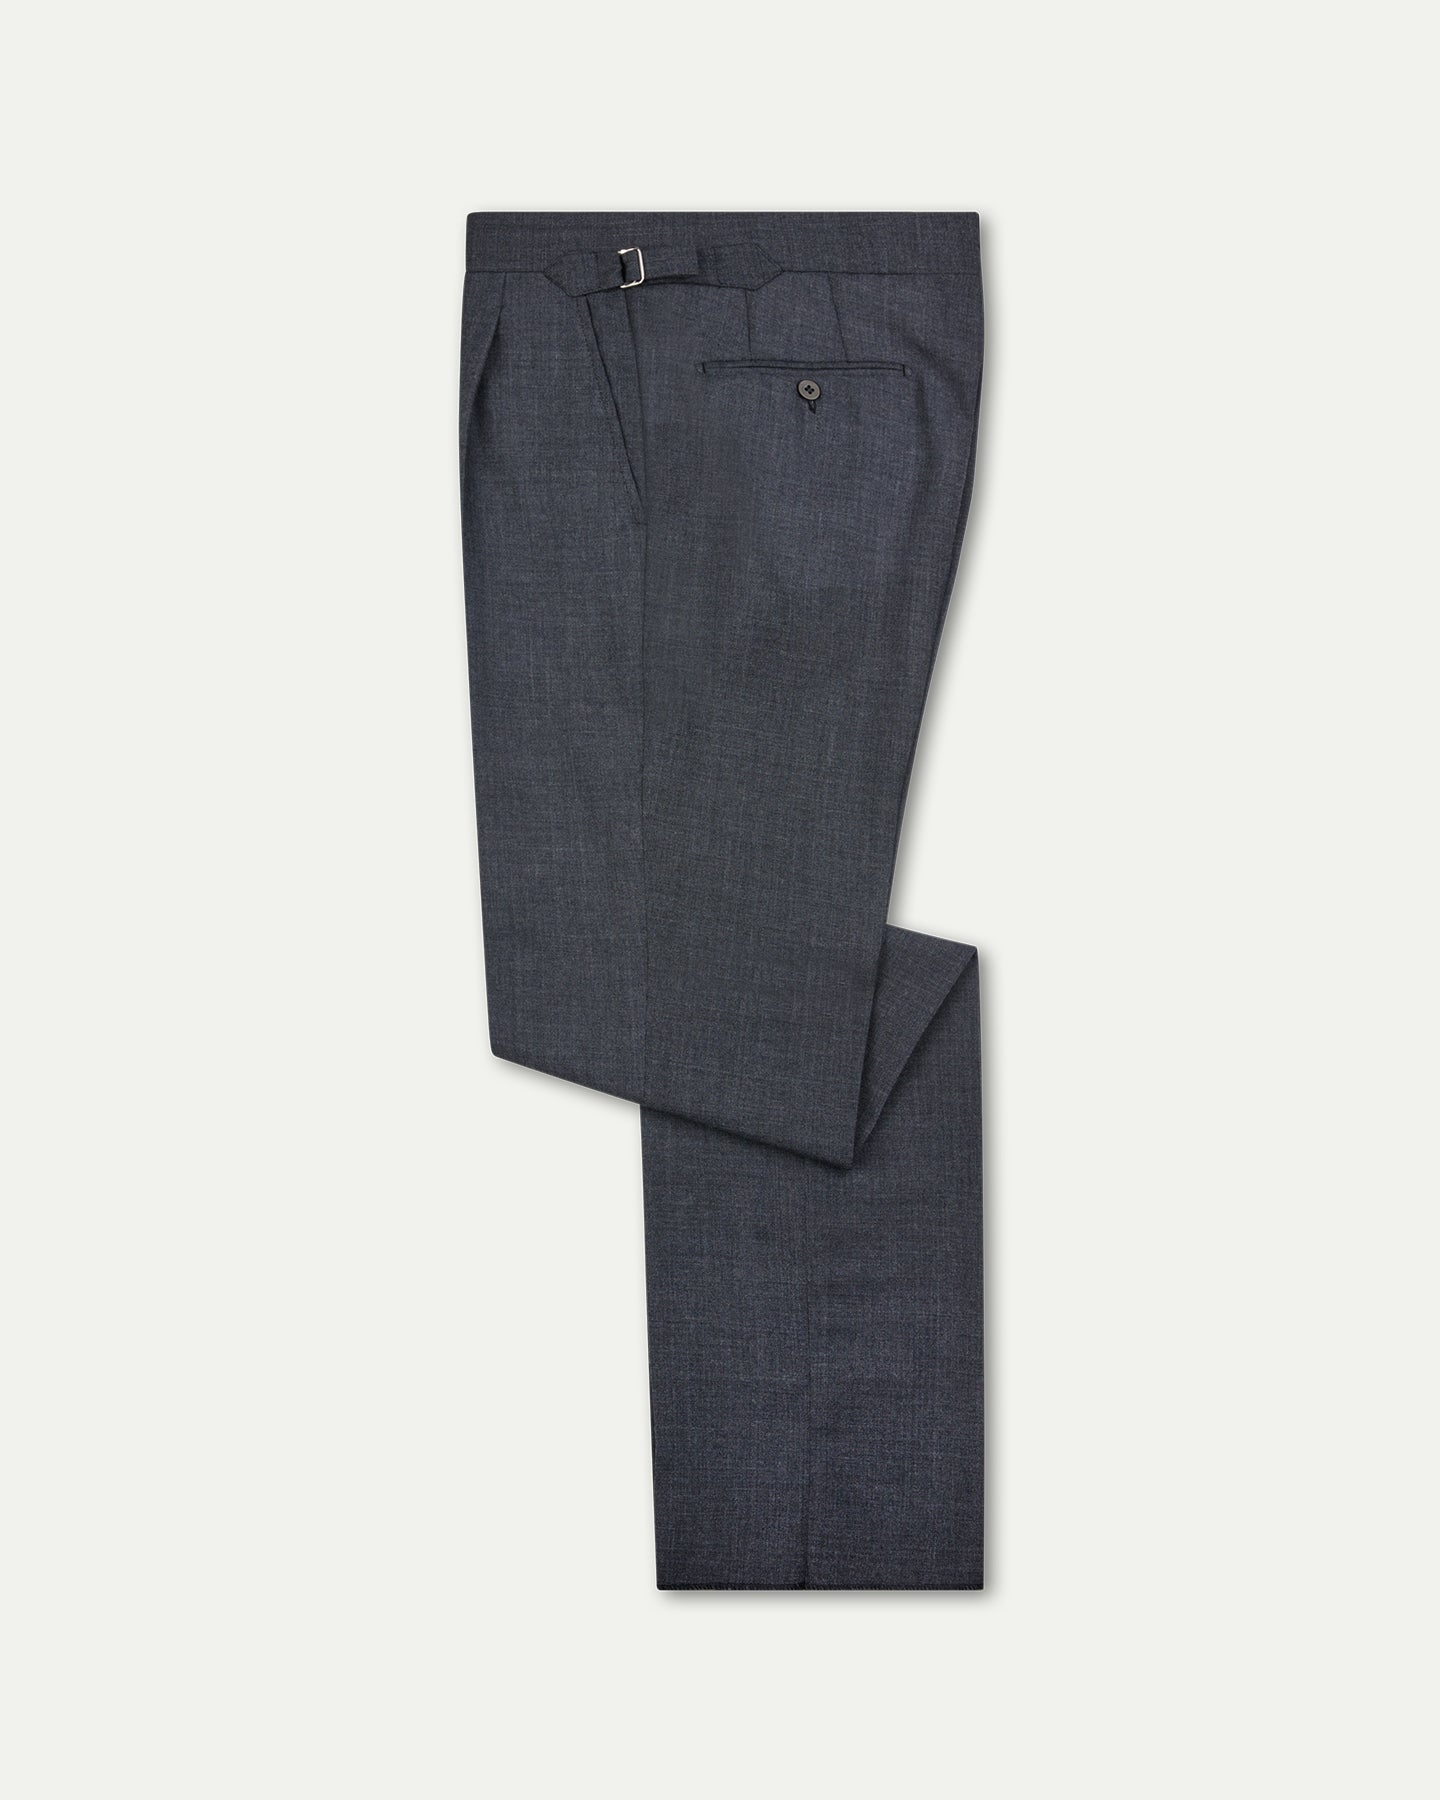 Made-To-Order Trousers in Mid Grey Fresco